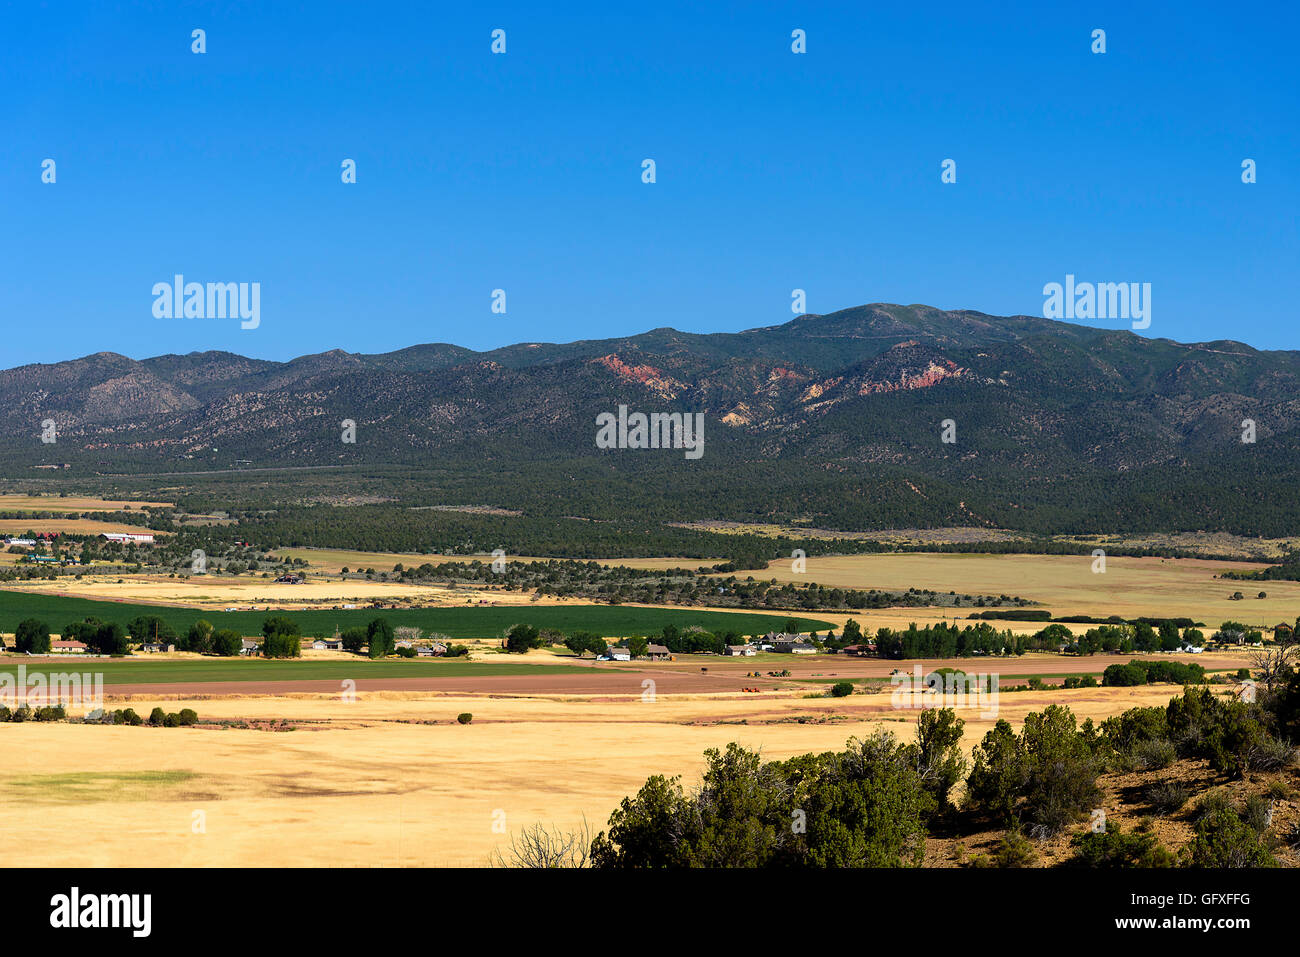 Valley of golden grass and green farm land with mountains in back ground under blue sky. Stock Photo